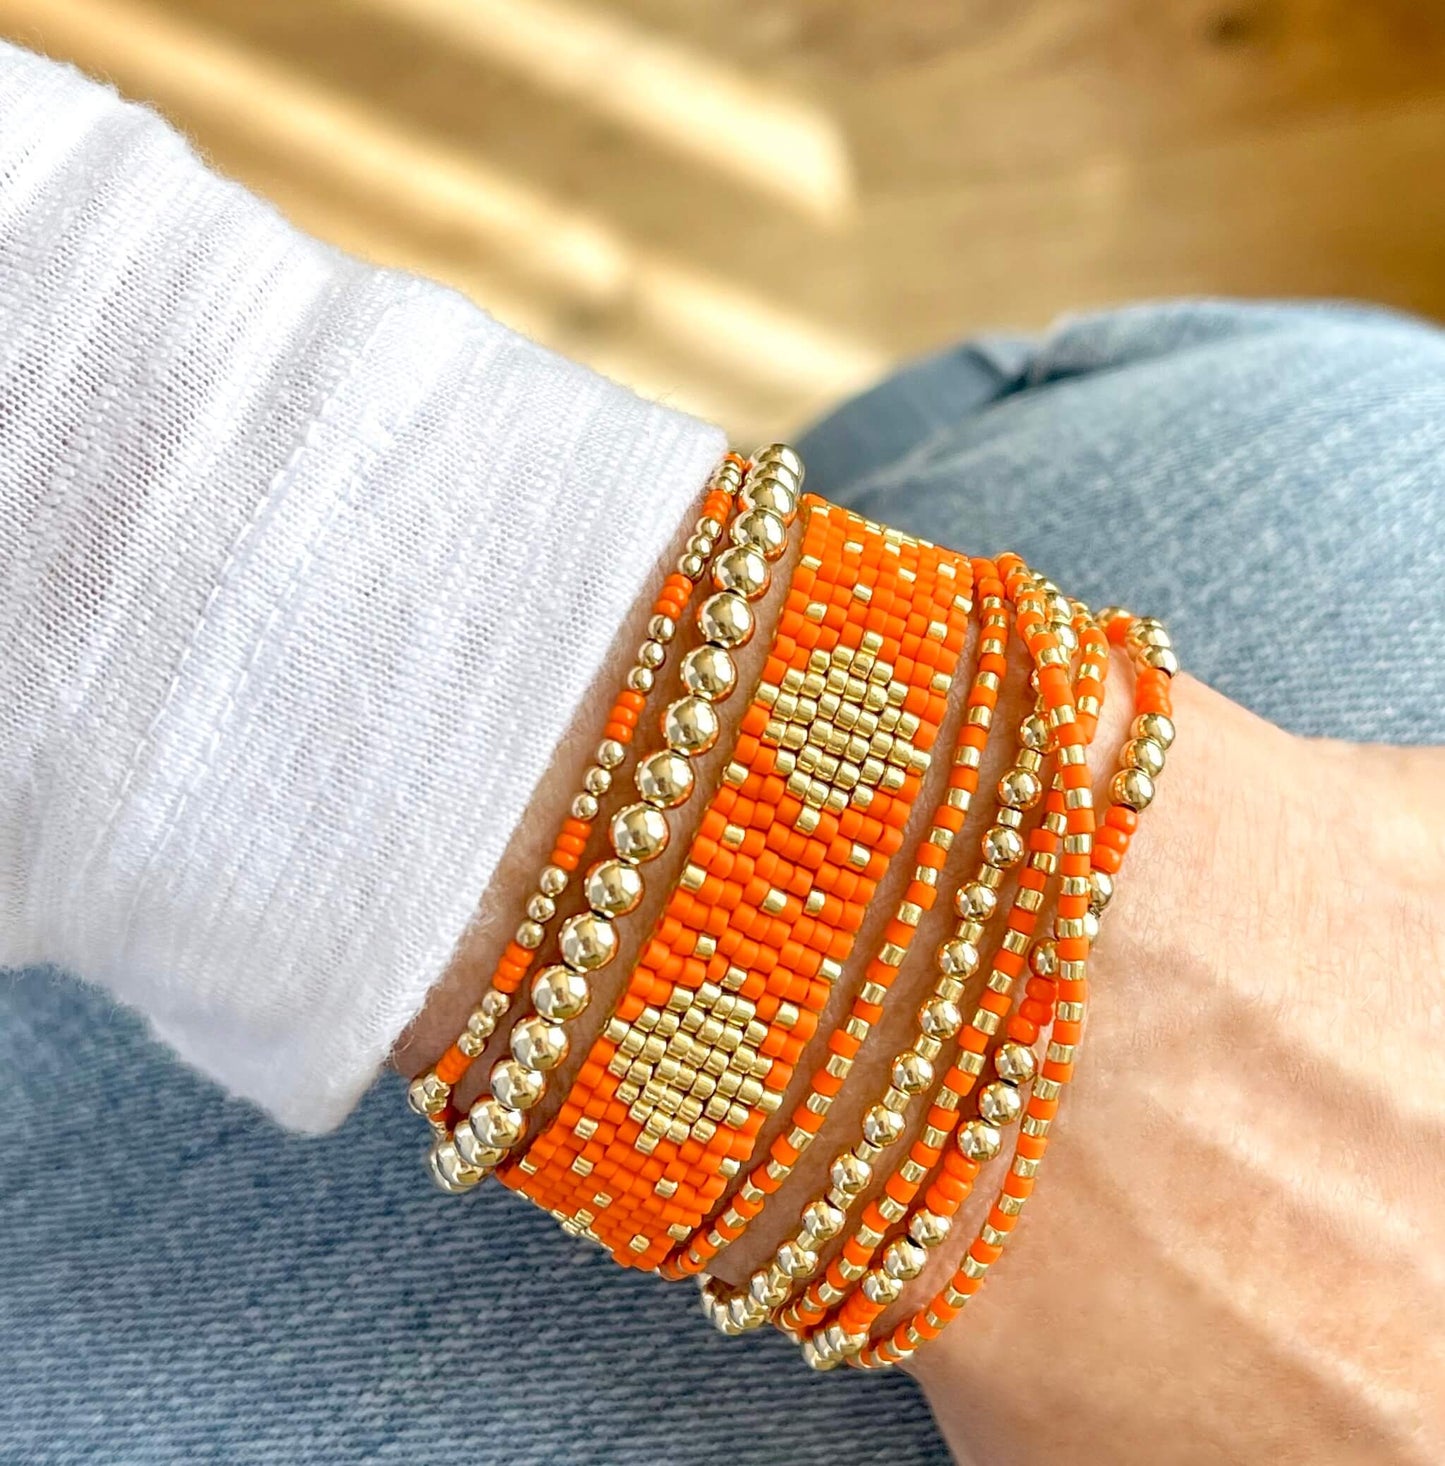 Orange bracelets with a handwoven seed bead cuff and wrap, and 14K gold filled round bead stretch bracelets.